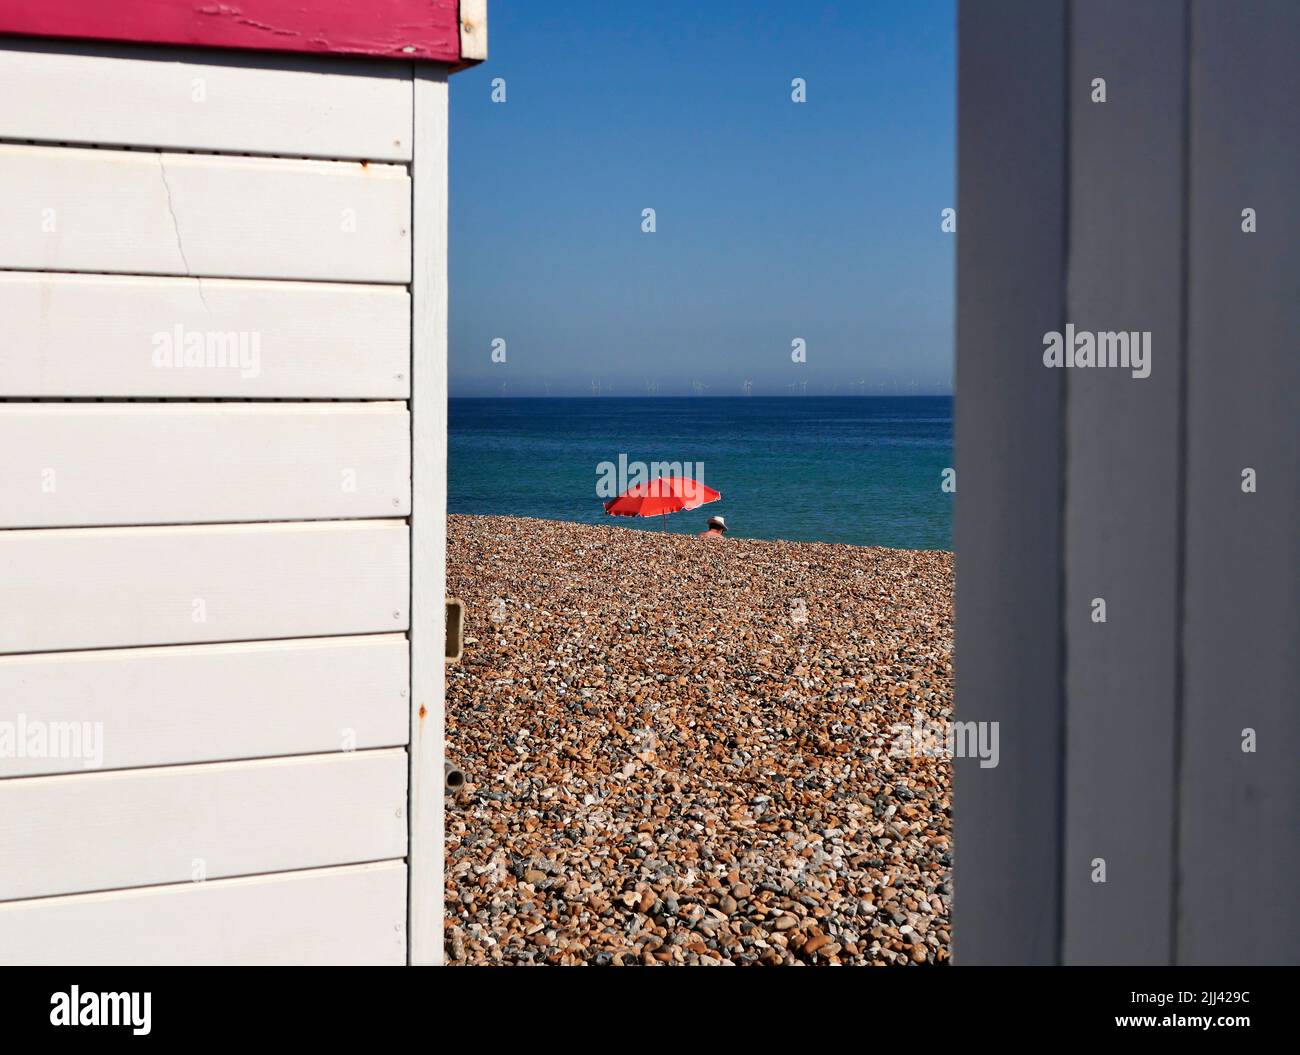 AJAXNETPHOTO. JUNE, 2021. WORTHING, ENGLAND. - BLUE SKY BLUE SEA DAY - AT THE SEASIDE, LOOKING SOUTH OVER THE ENGLISH CHANNEL.PHOTO:JONATHAN EASTLAND/AJAX REF:GX9 211209 2461 2 Stock Photo